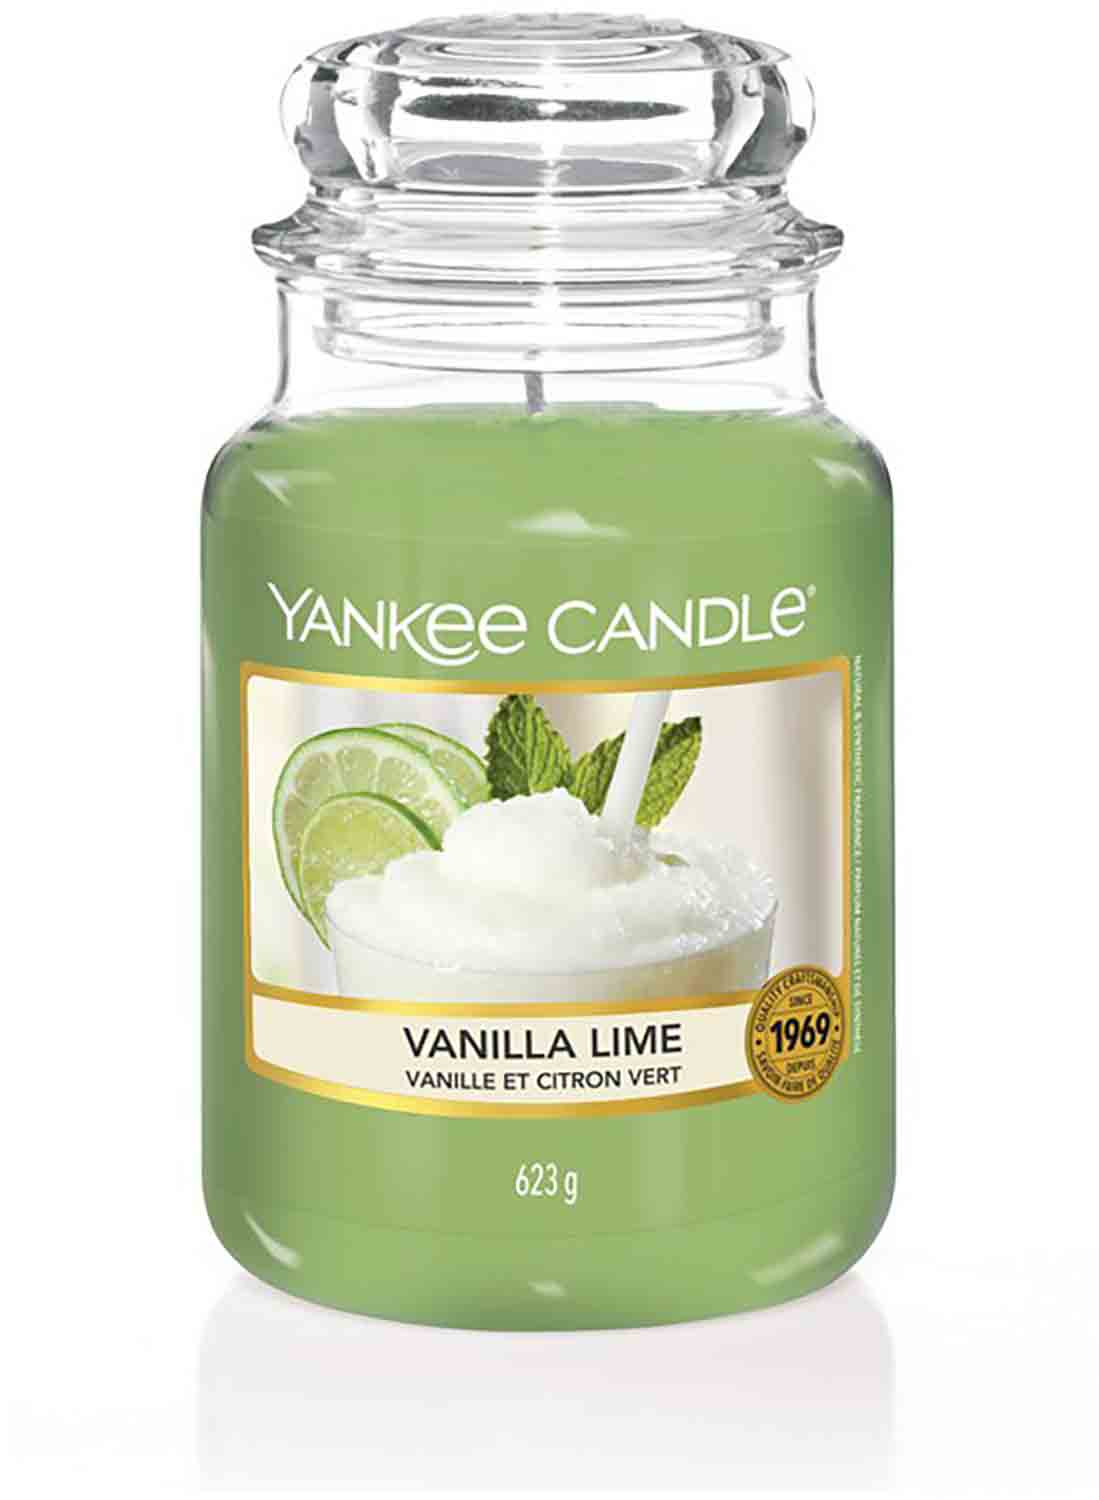 Yankee Candle Vanilla Lime 623 g Assorted